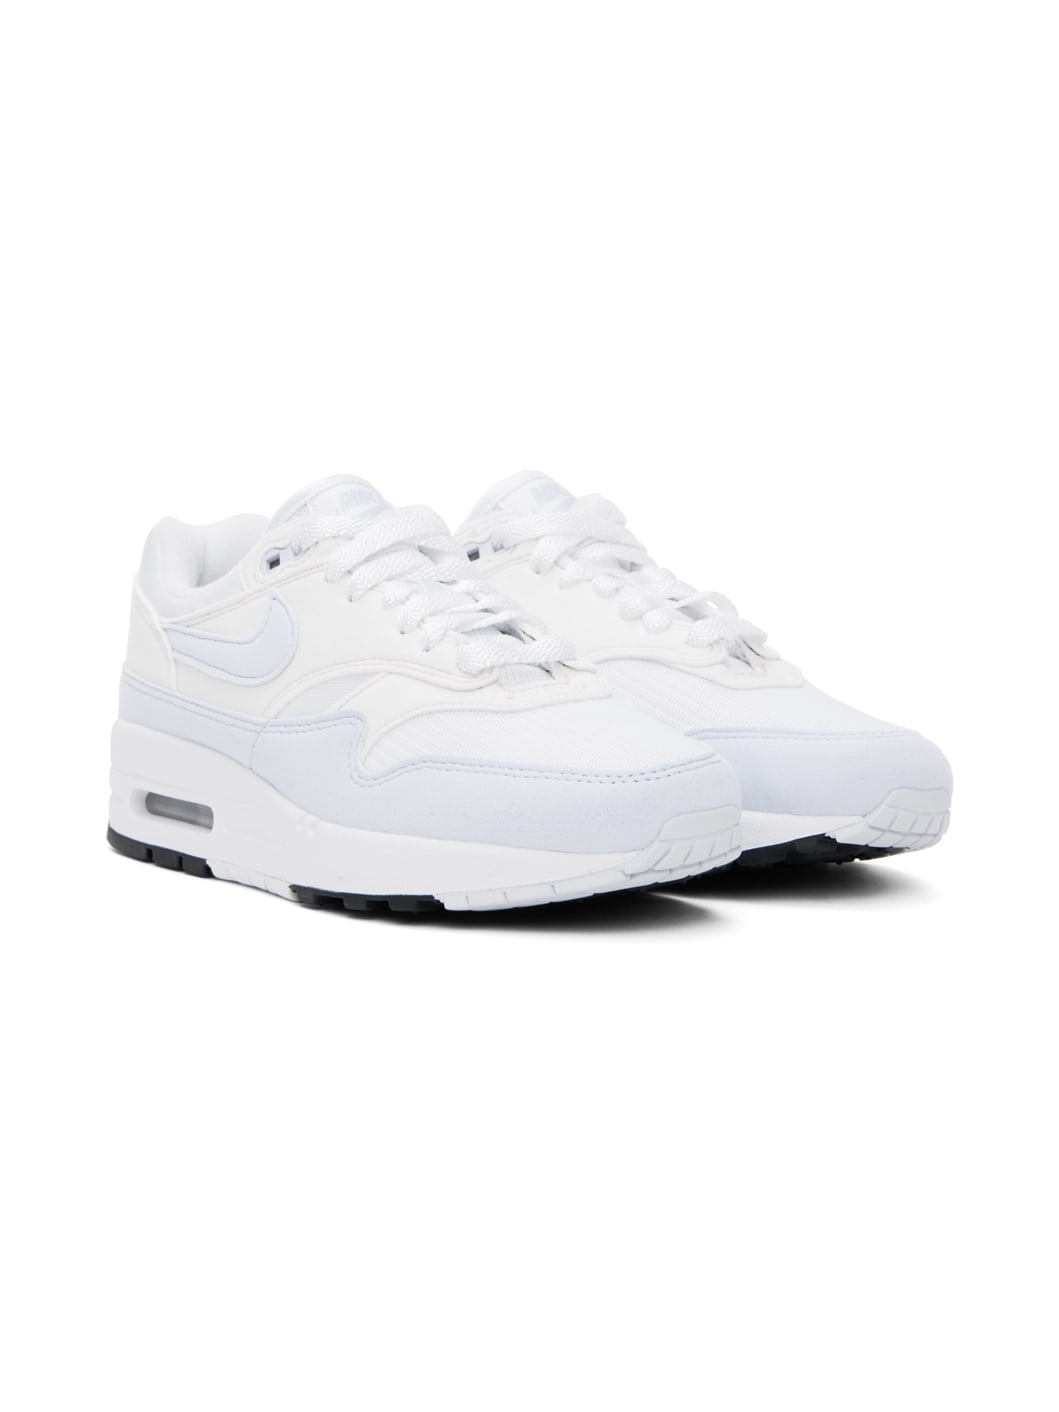 White & Blue Air Max 1 Sneakers - 4